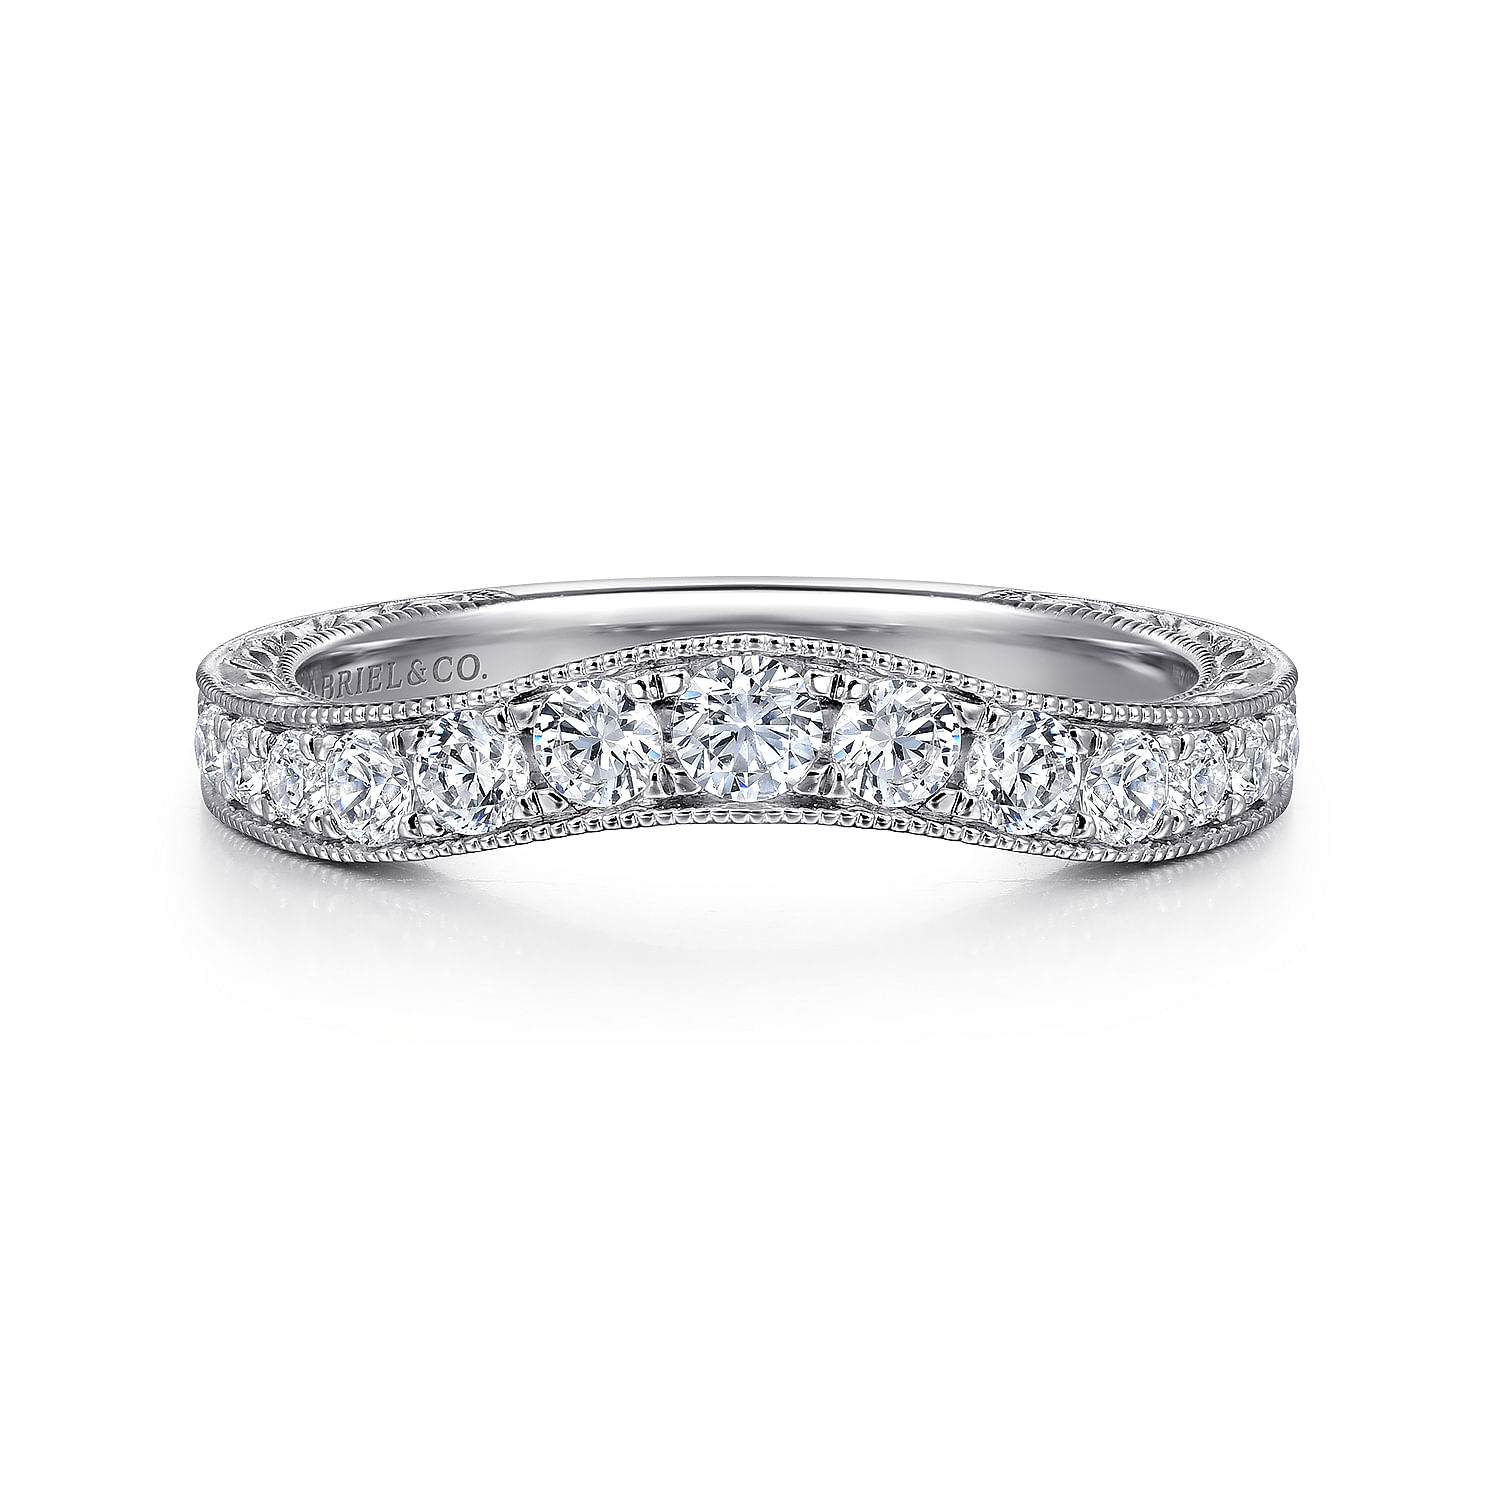 Provence - Vintage Inspired 14K White Gold Curved Channel Set Diamond Wedding Band with Engraving